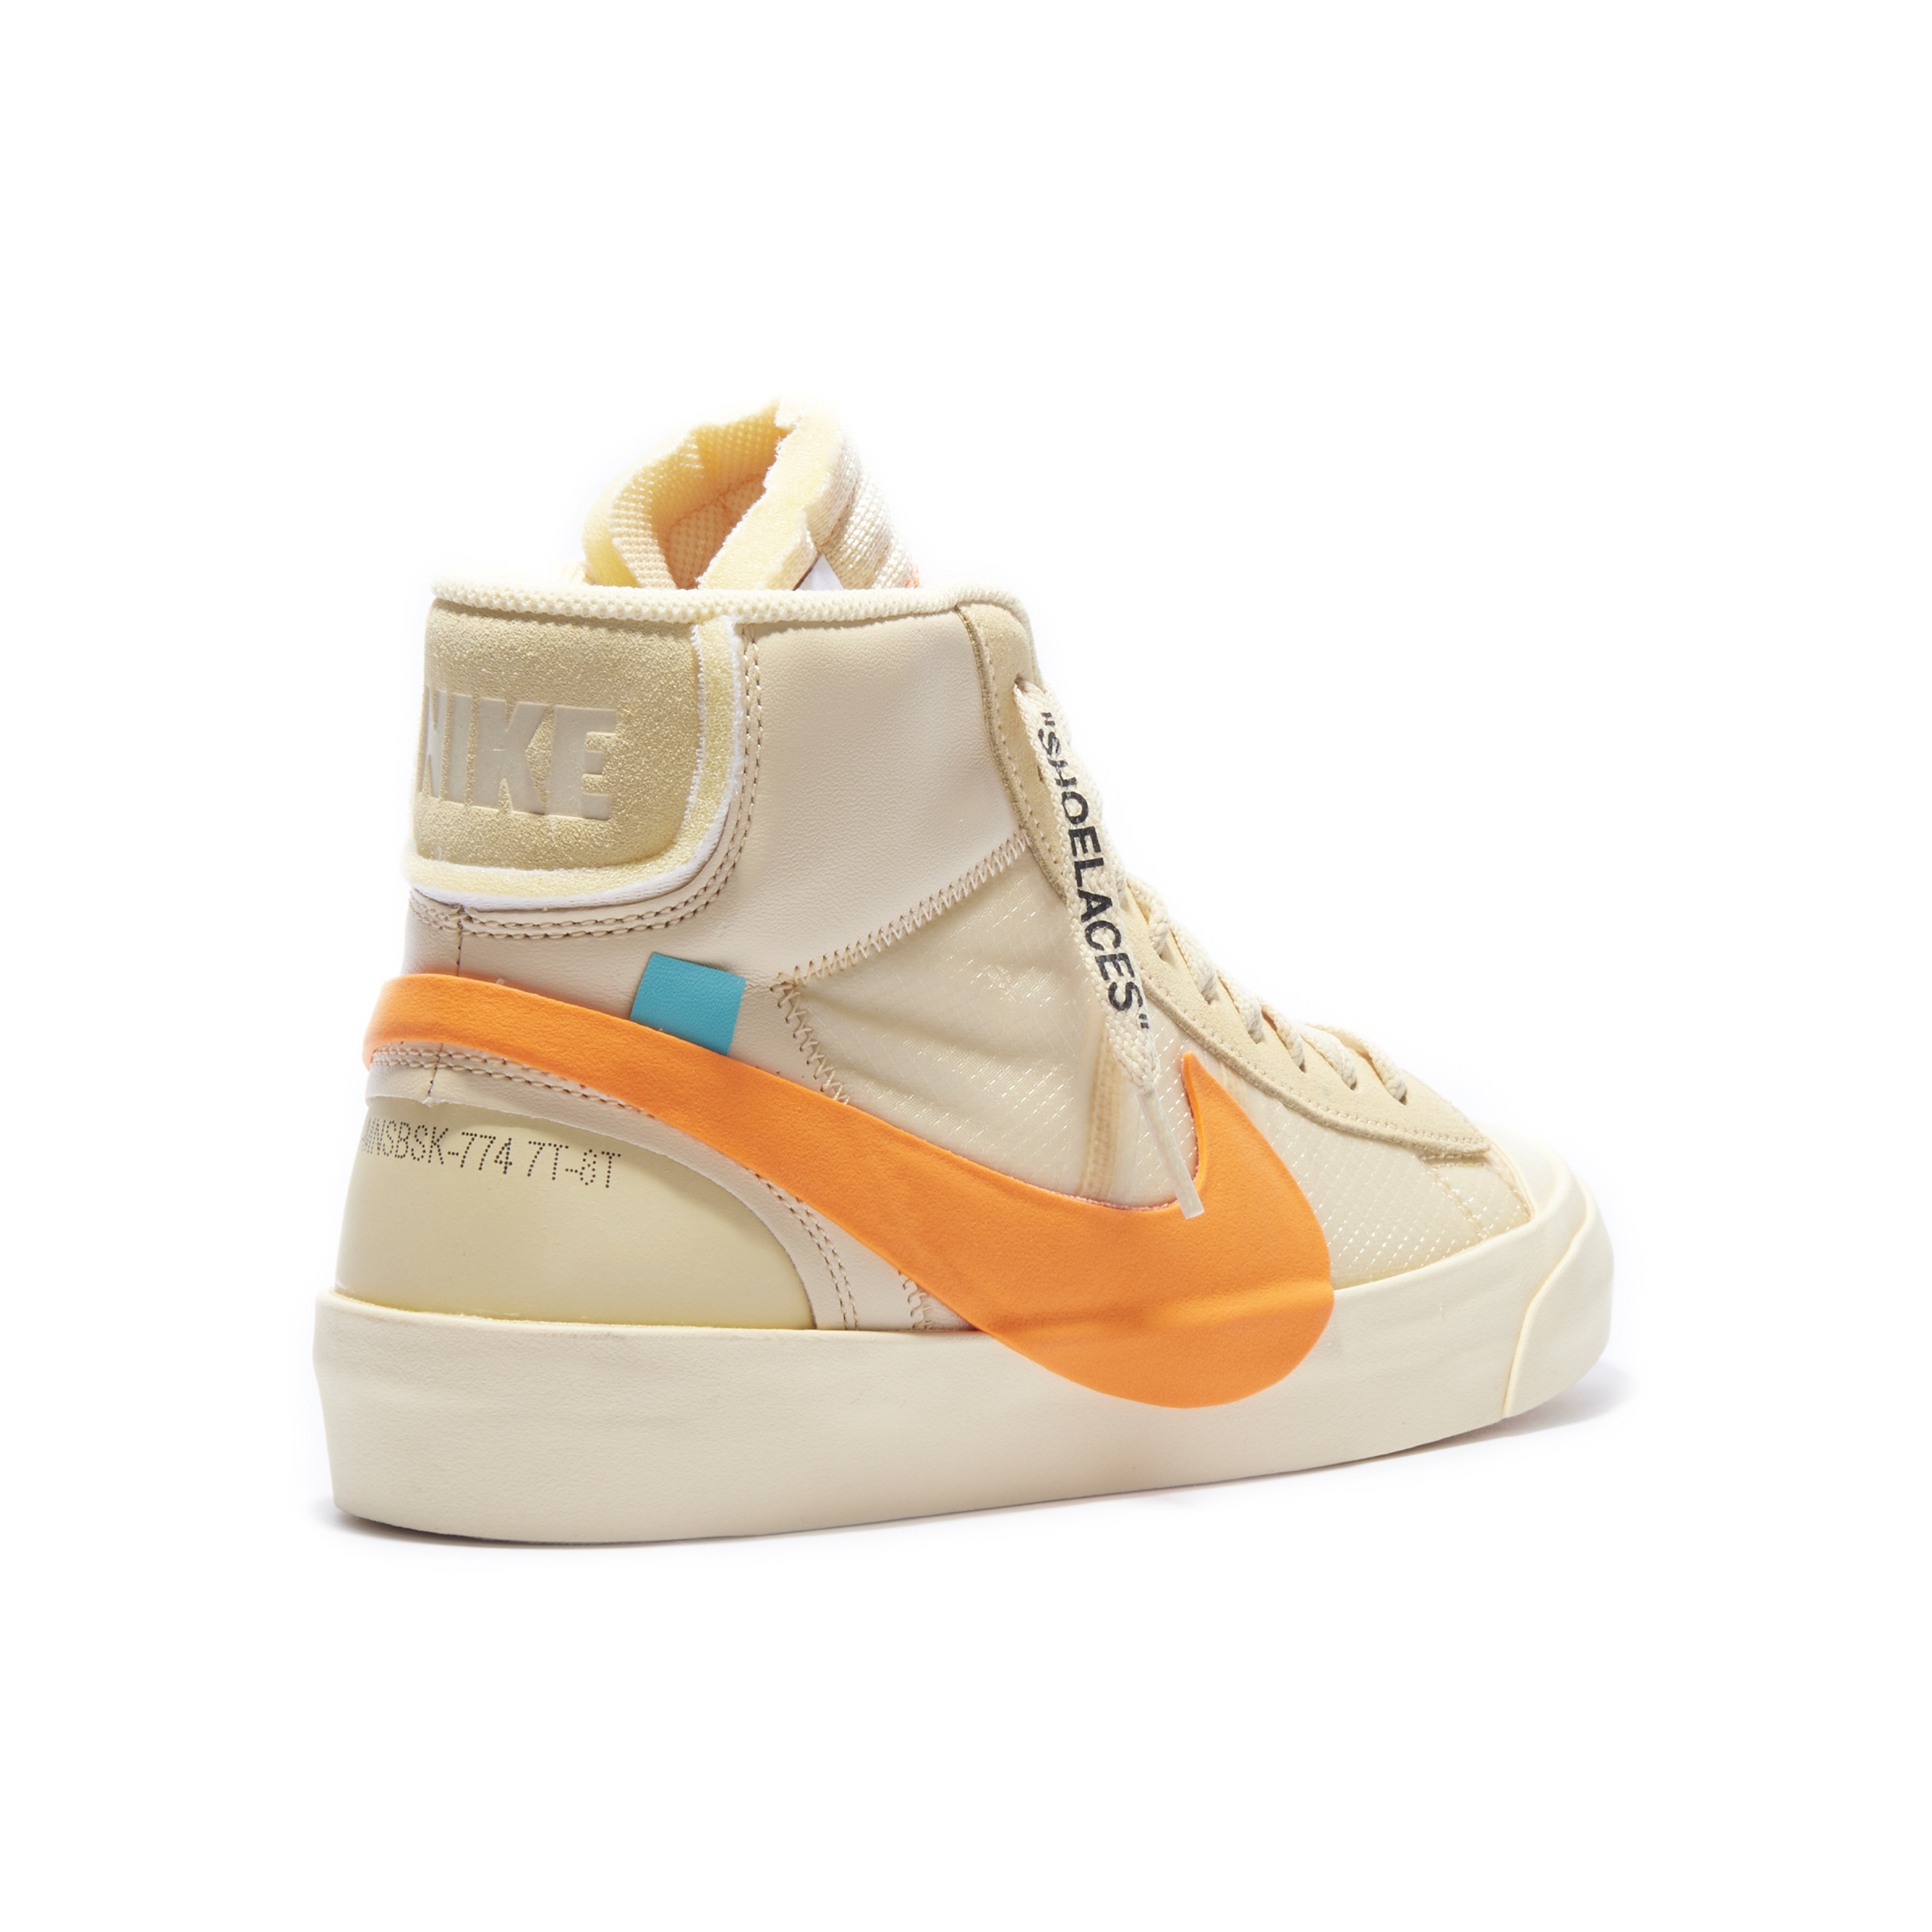 Blazer All Eve x Off-White | AA3832-700 | Laced